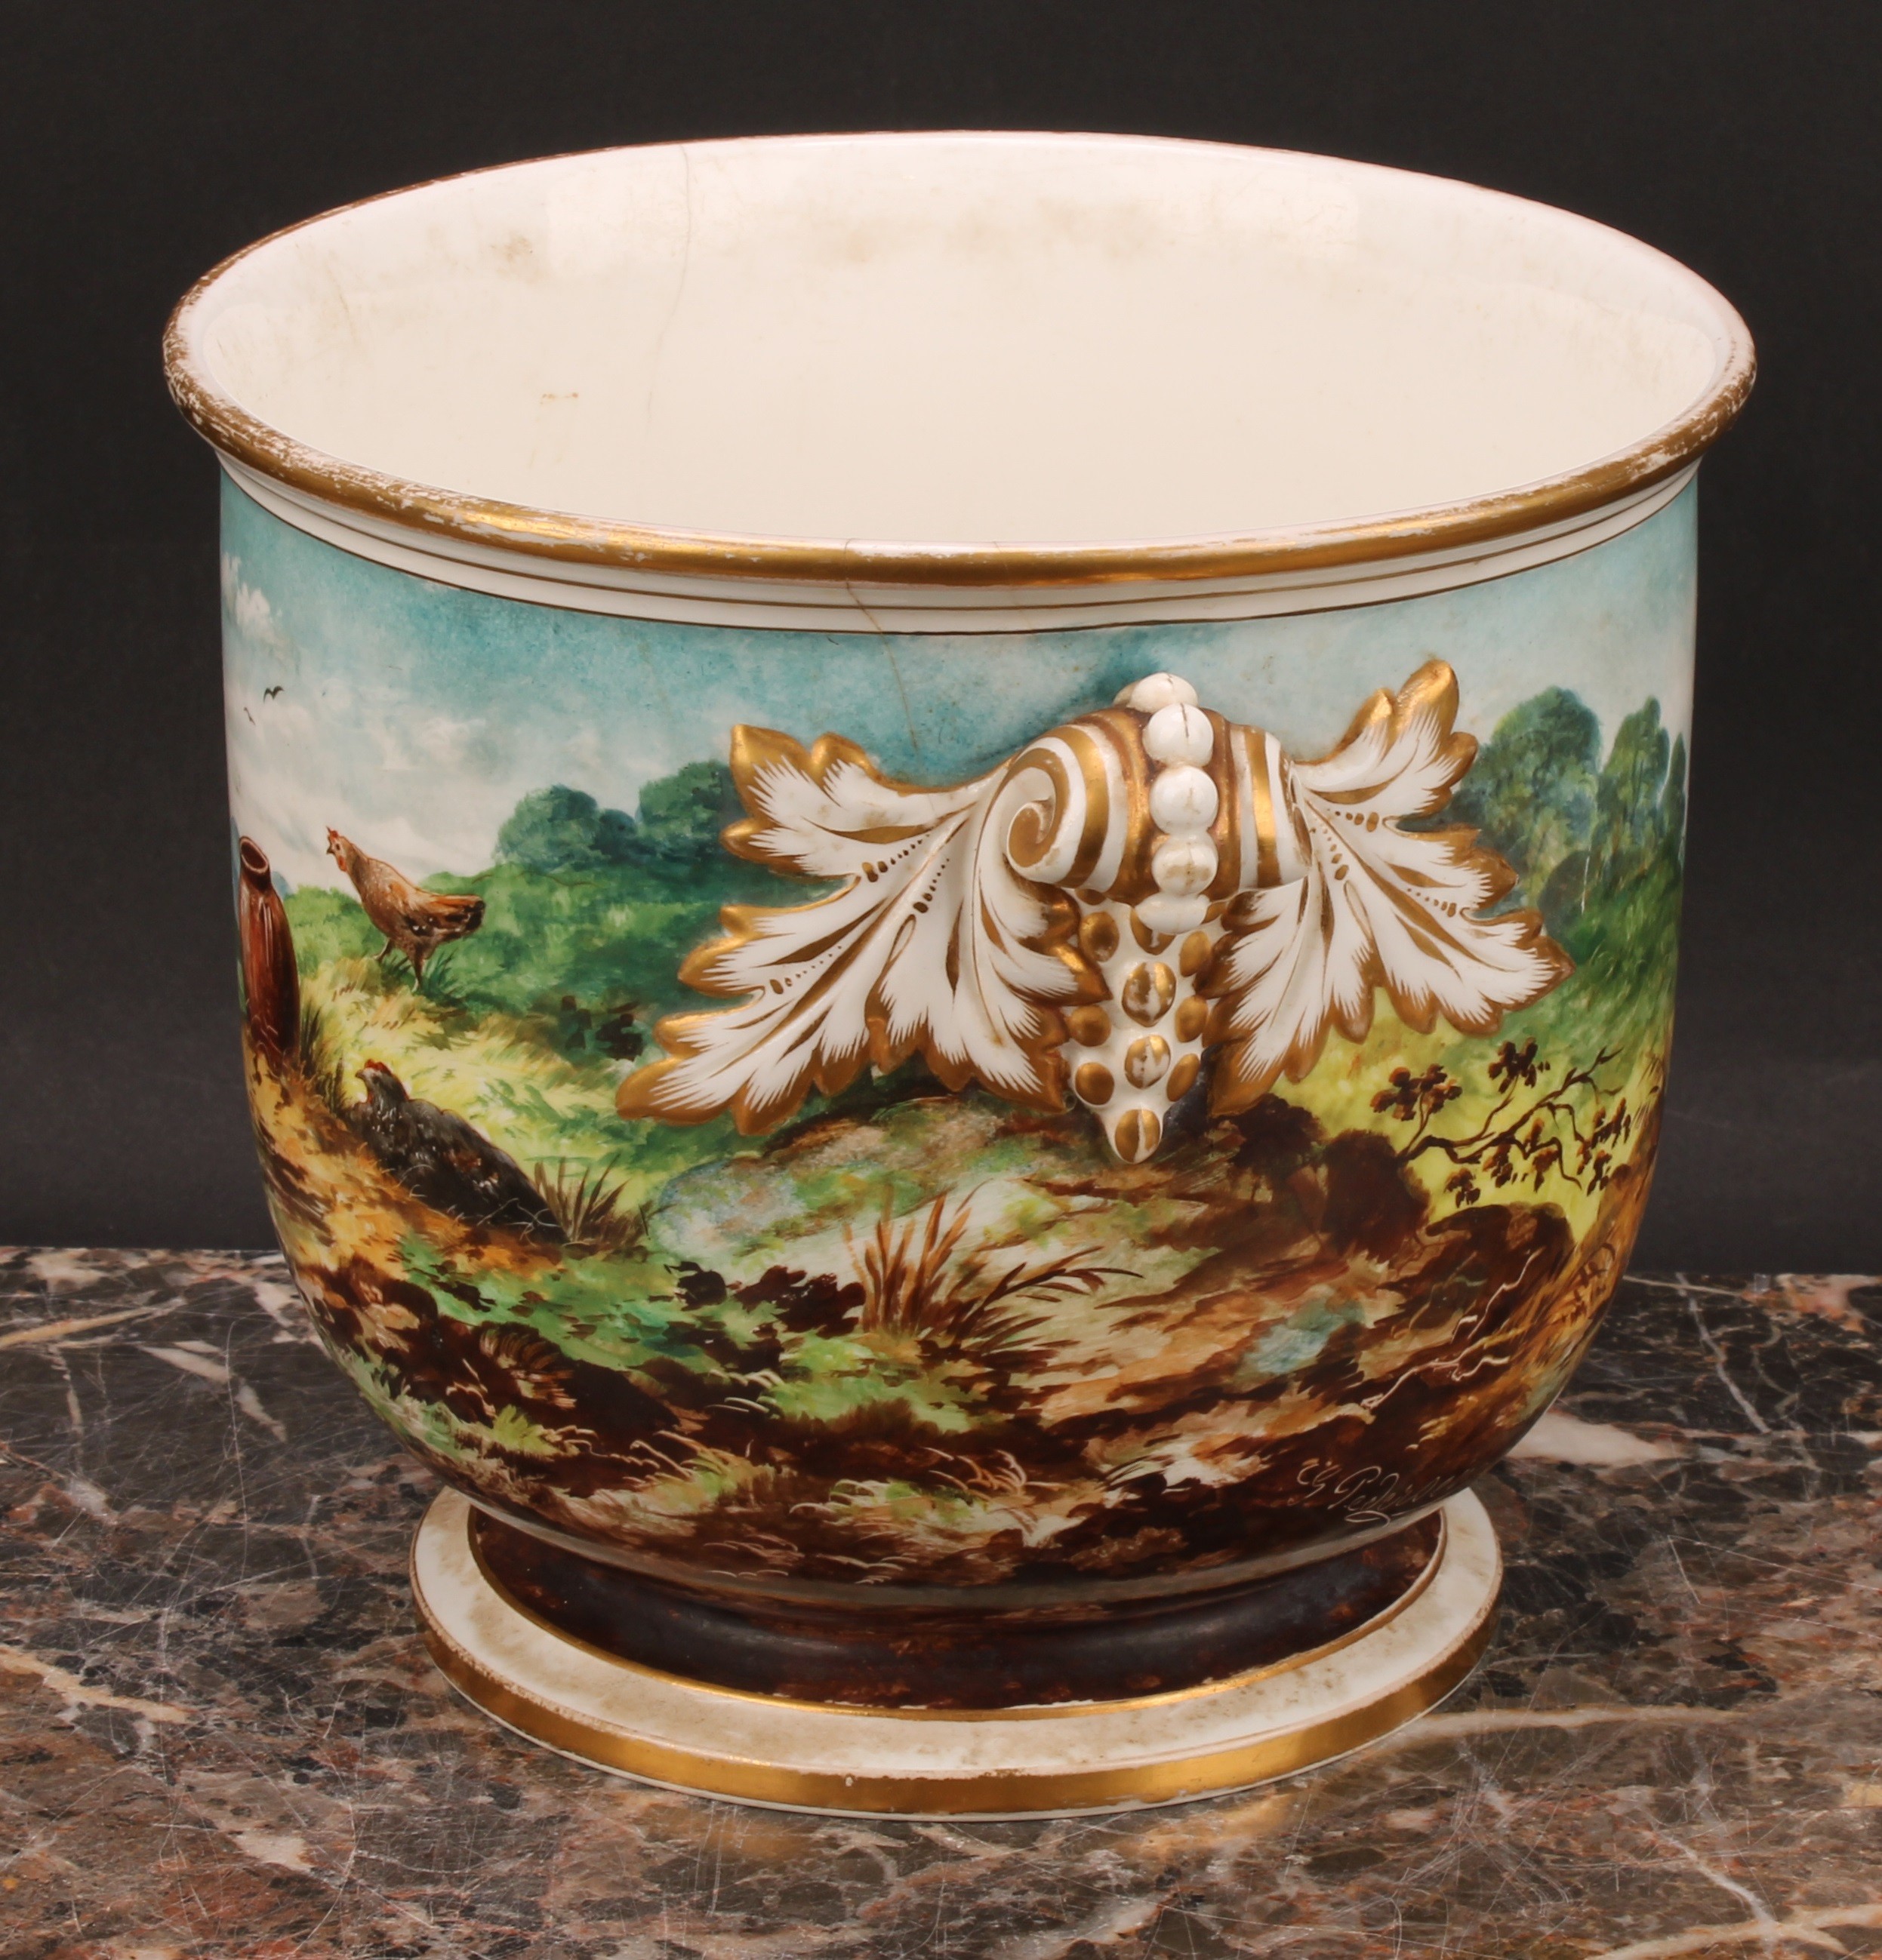 An associated pair of 19th century English porcelain cache pots, Brown-Westhead, Moore & Co., - Image 11 of 14